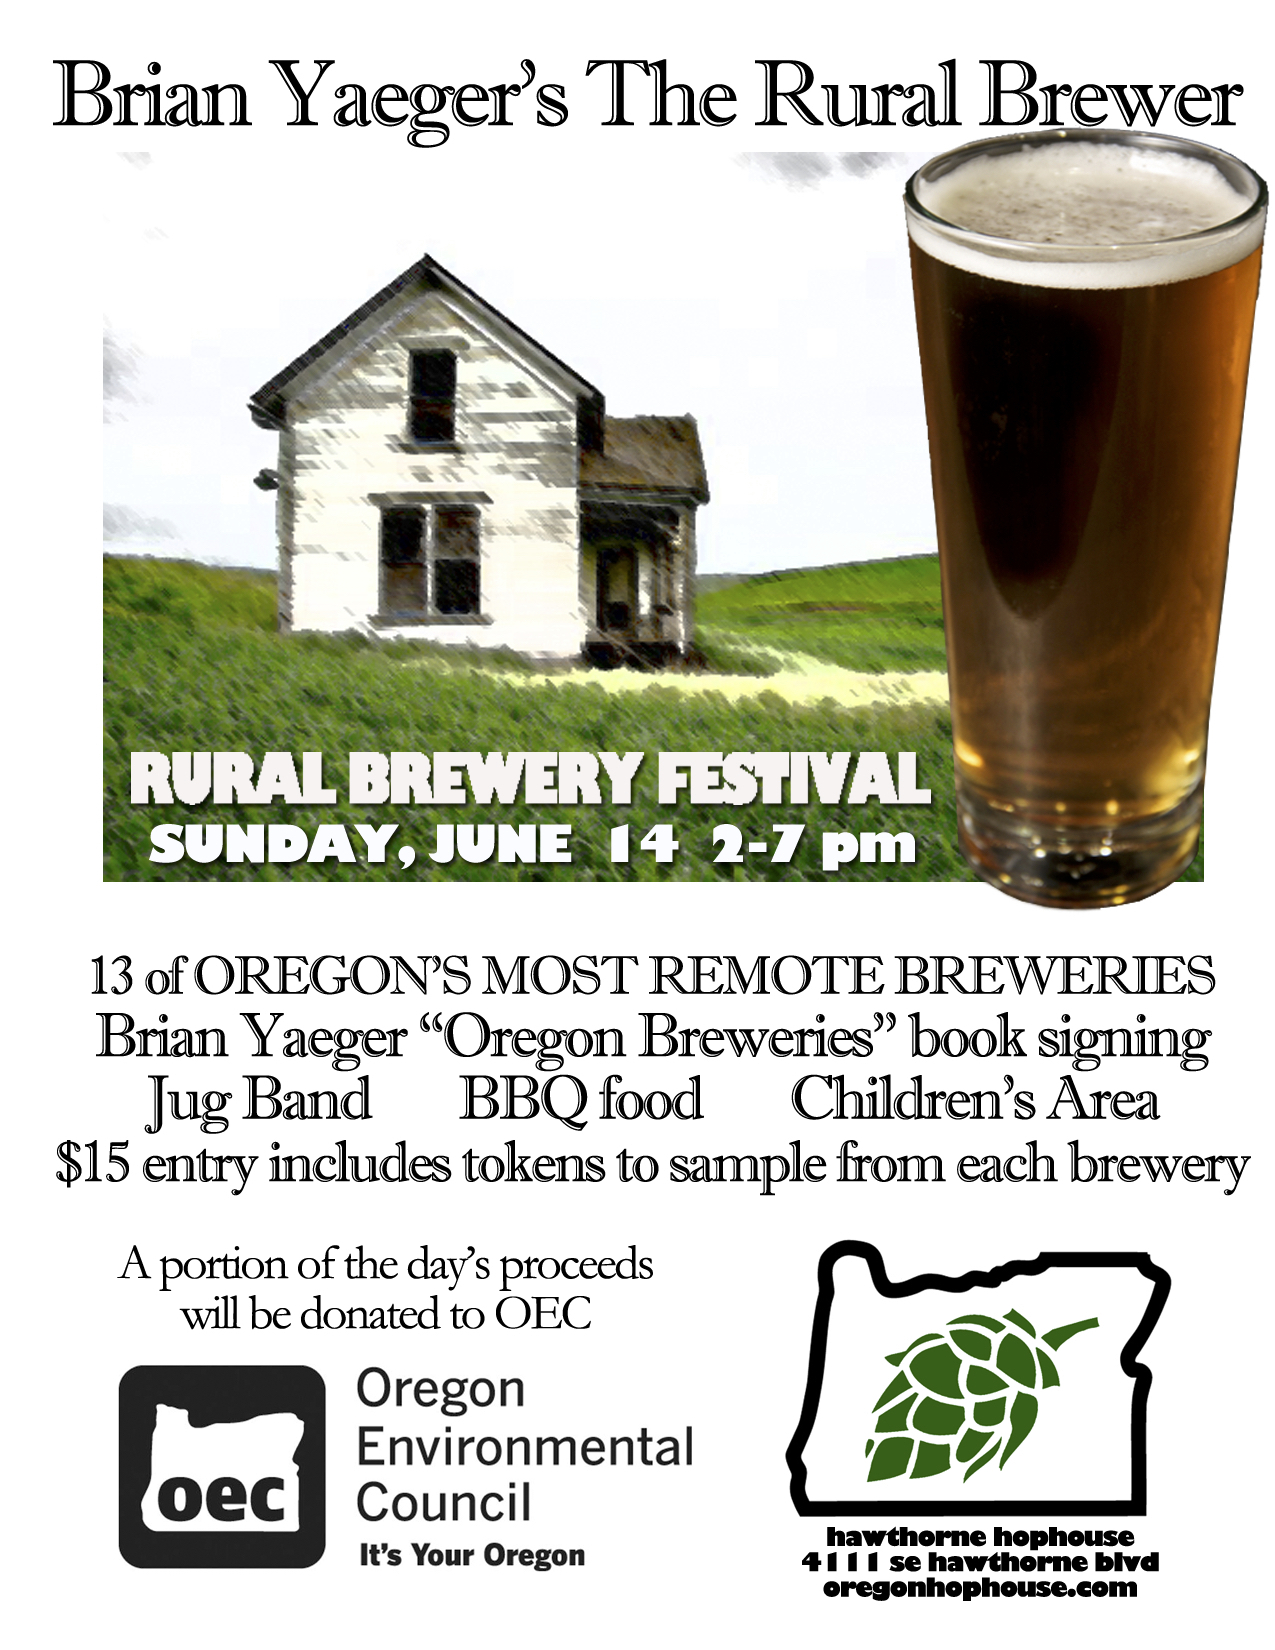 Brian Yaeger's The Rural Brewer